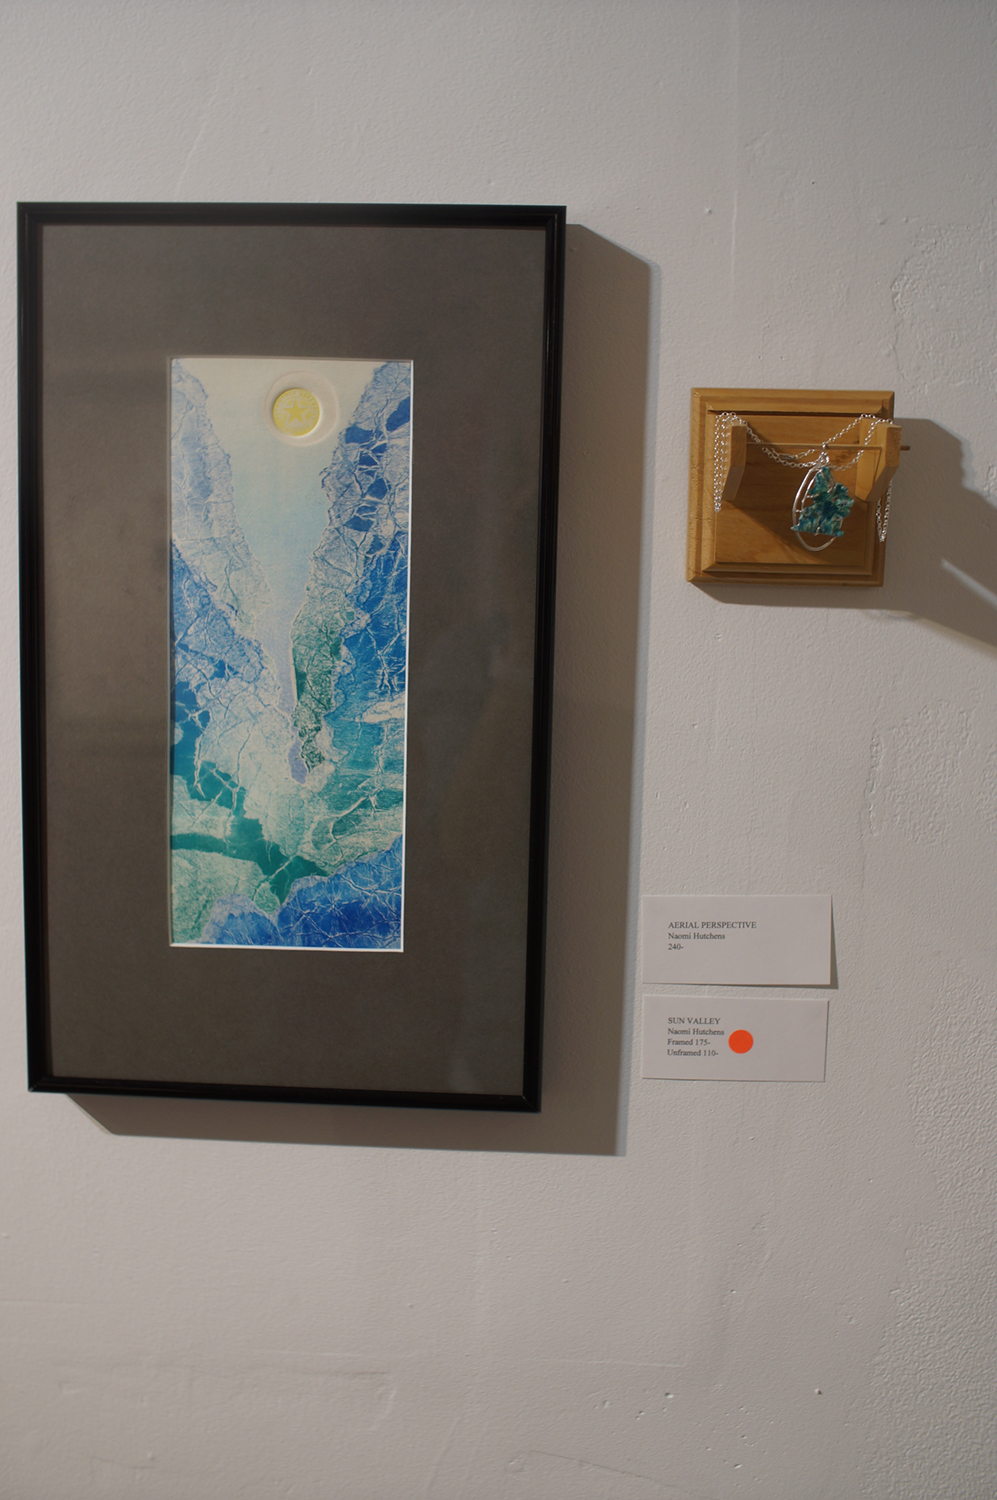 Sun Valley and Aerial Perspective hang on the wall at Naomi Hutchquist's BFA thesis exhibition at Well Sreet Art Gallery in 2019. Image courtesy of Naomi Hutchquist.